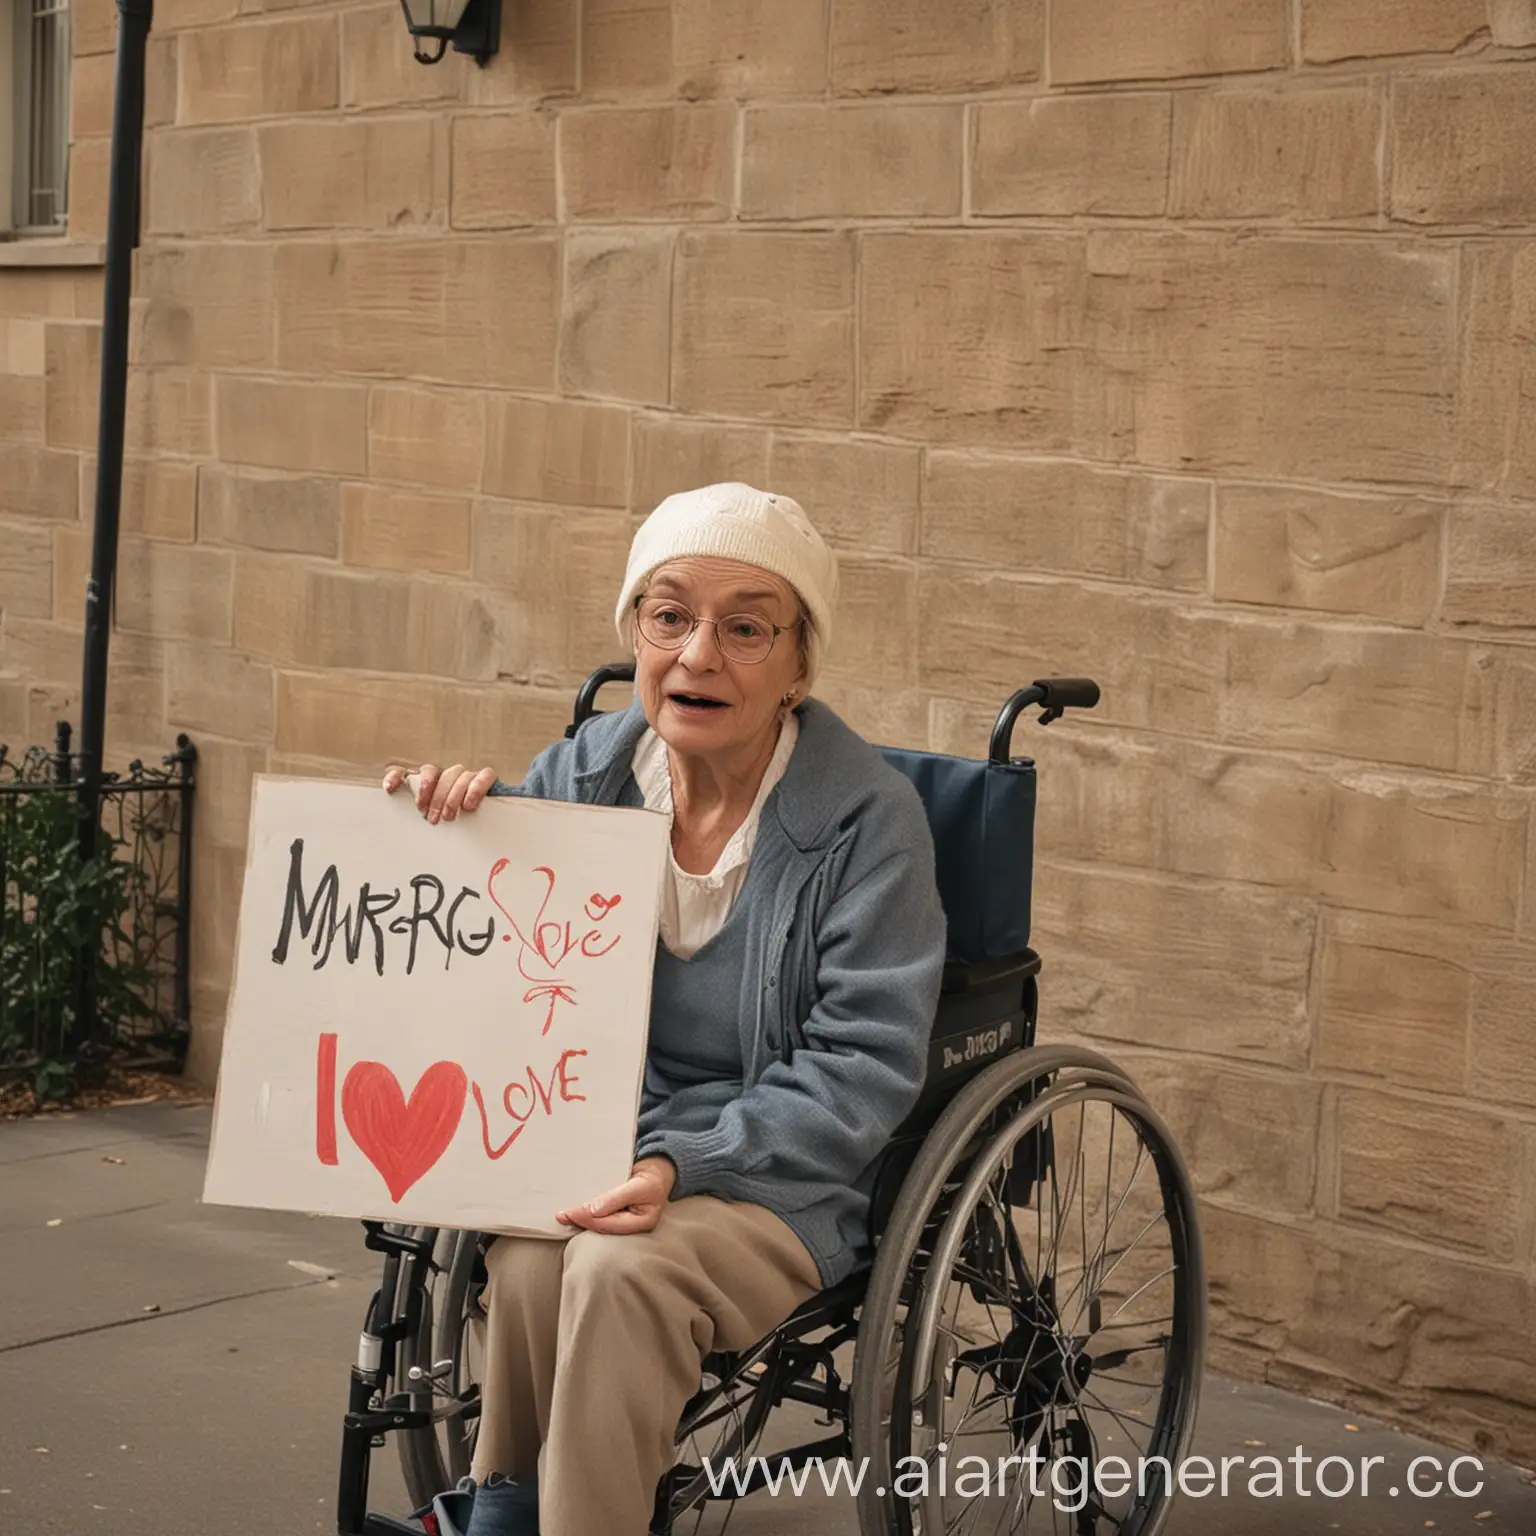 Inspirational-Message-Invalid-in-Wheelchair-Expresses-Love-for-Margo